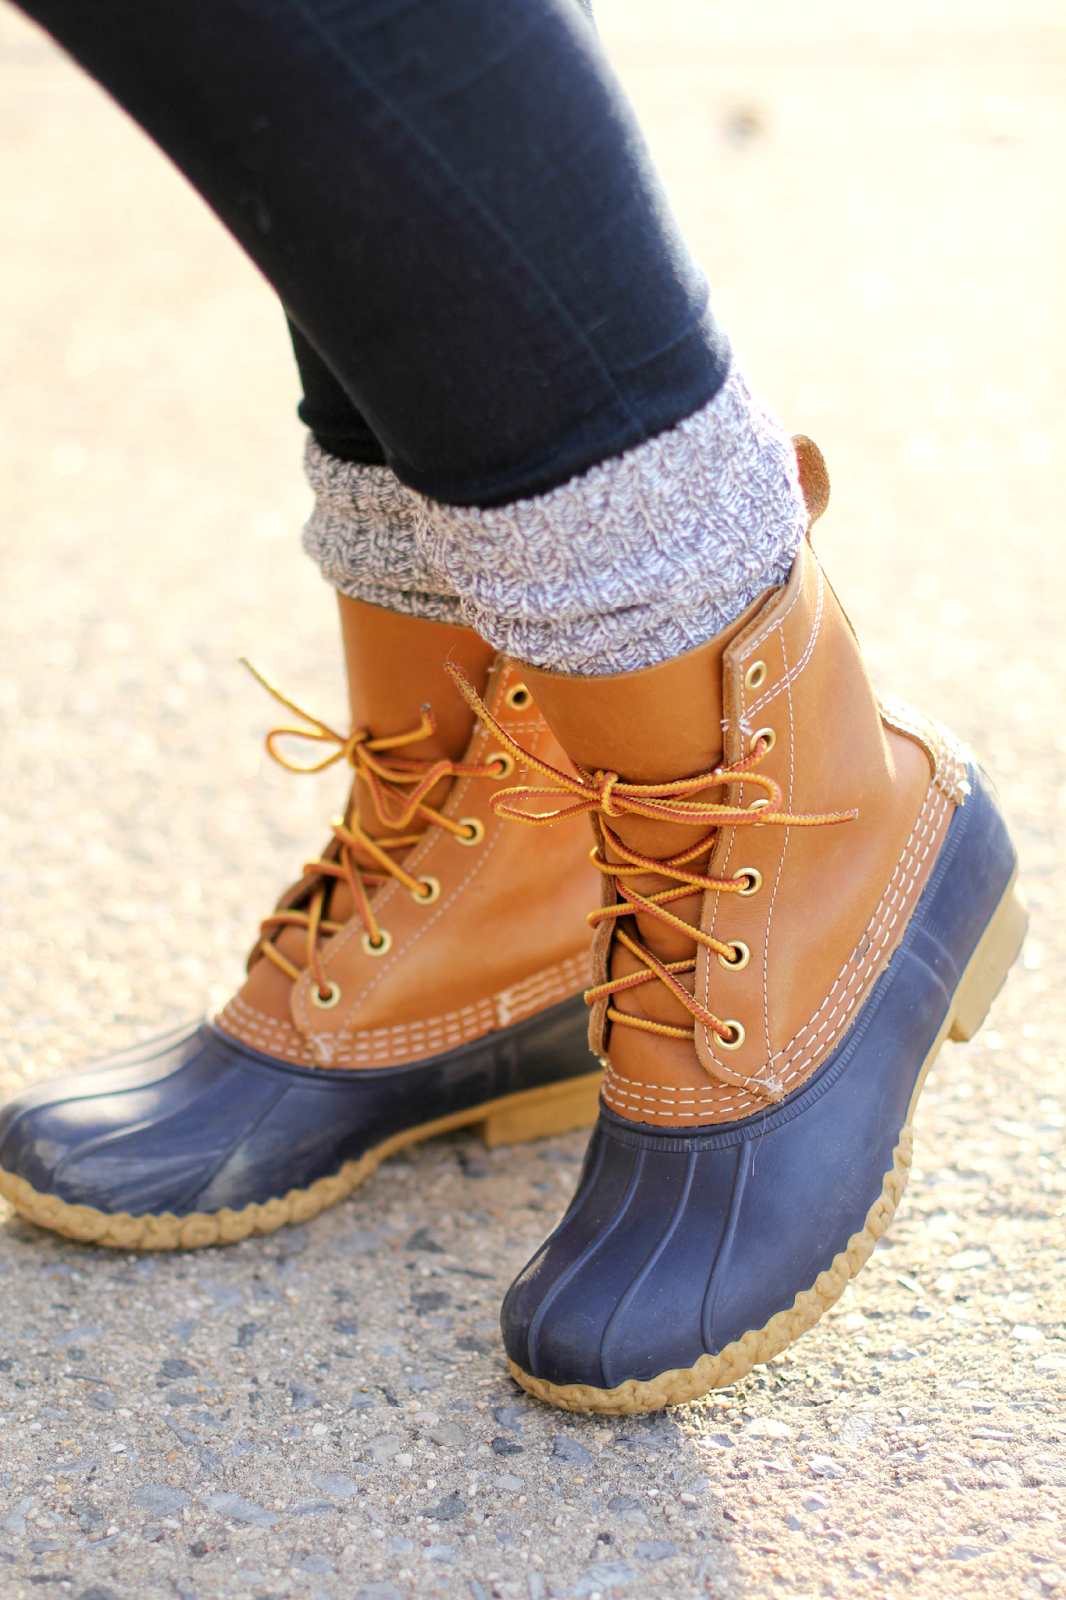 Guide to Buying LL Bean Boots by New York fashion blogger Covering Base